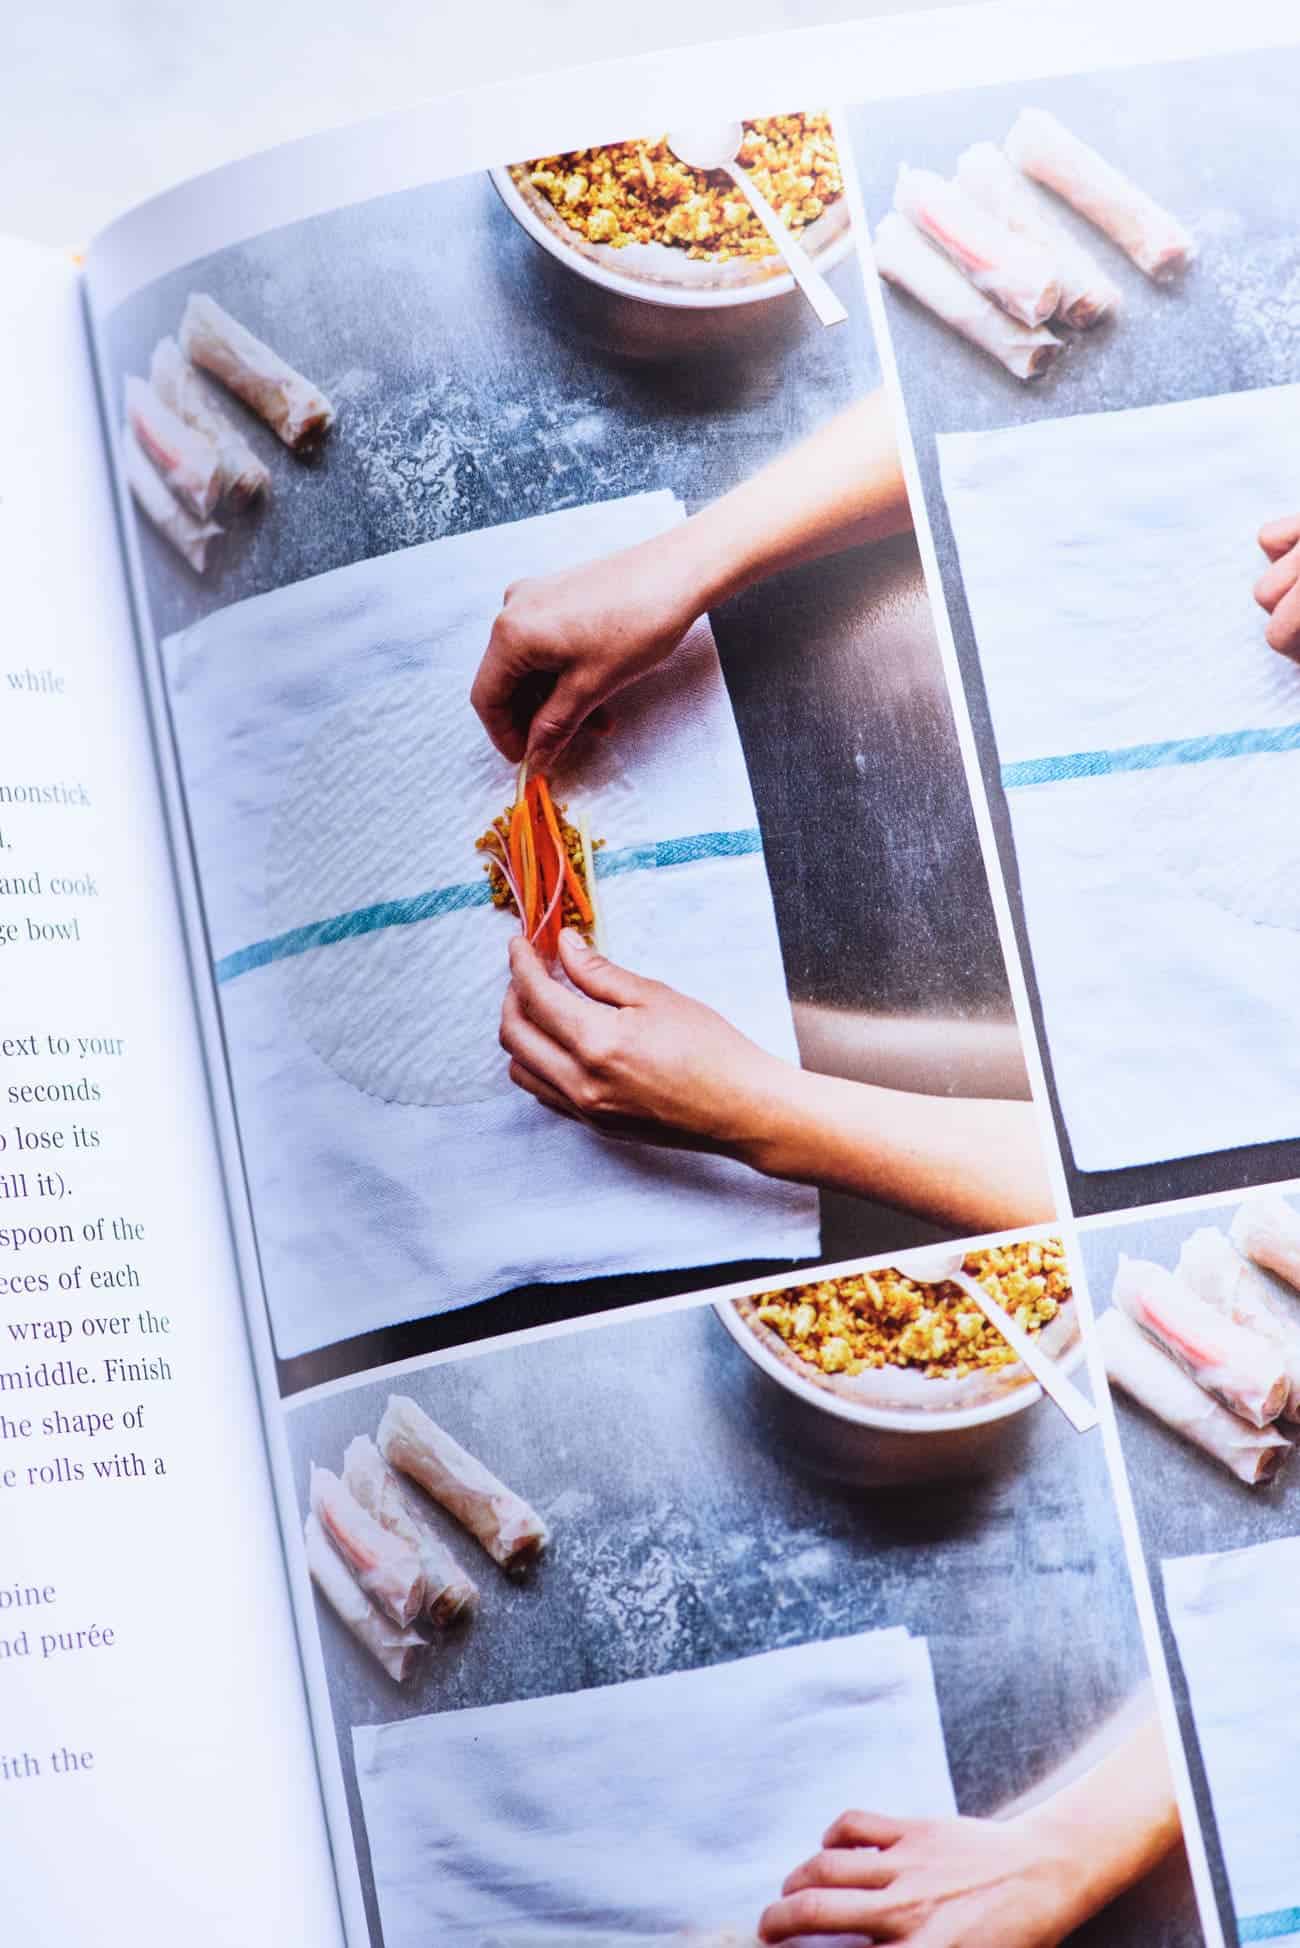 Tempeh rice rolls recipe page in The Complete Vegan Cookbook